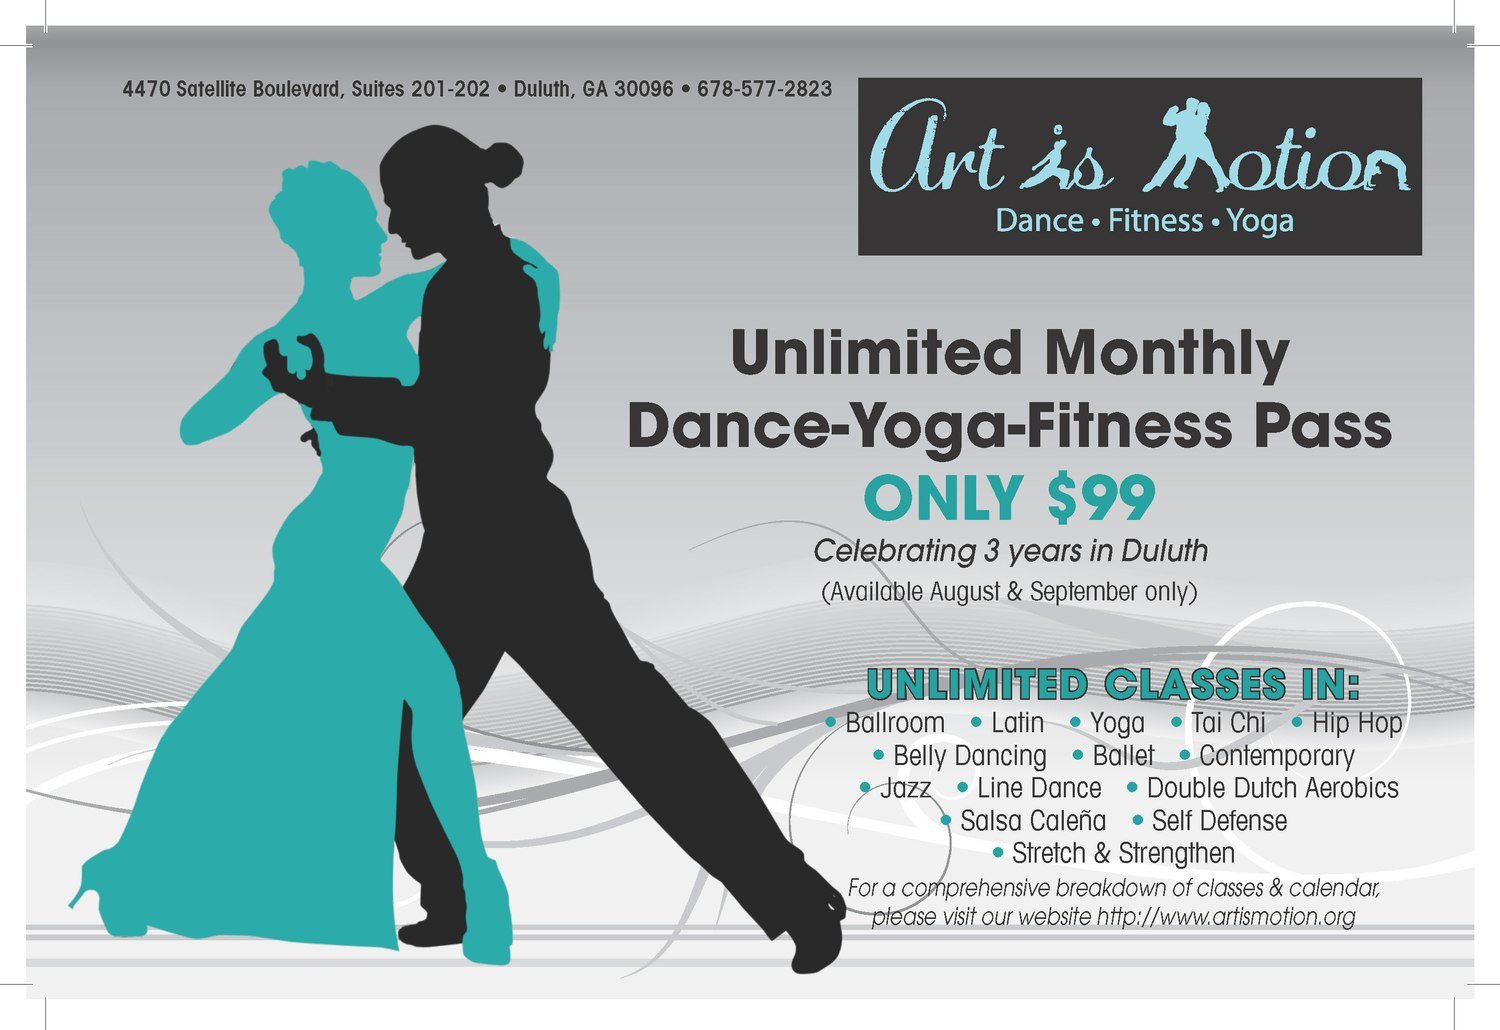 Unlimited Monthly Pass - Dance Yoga Fitness